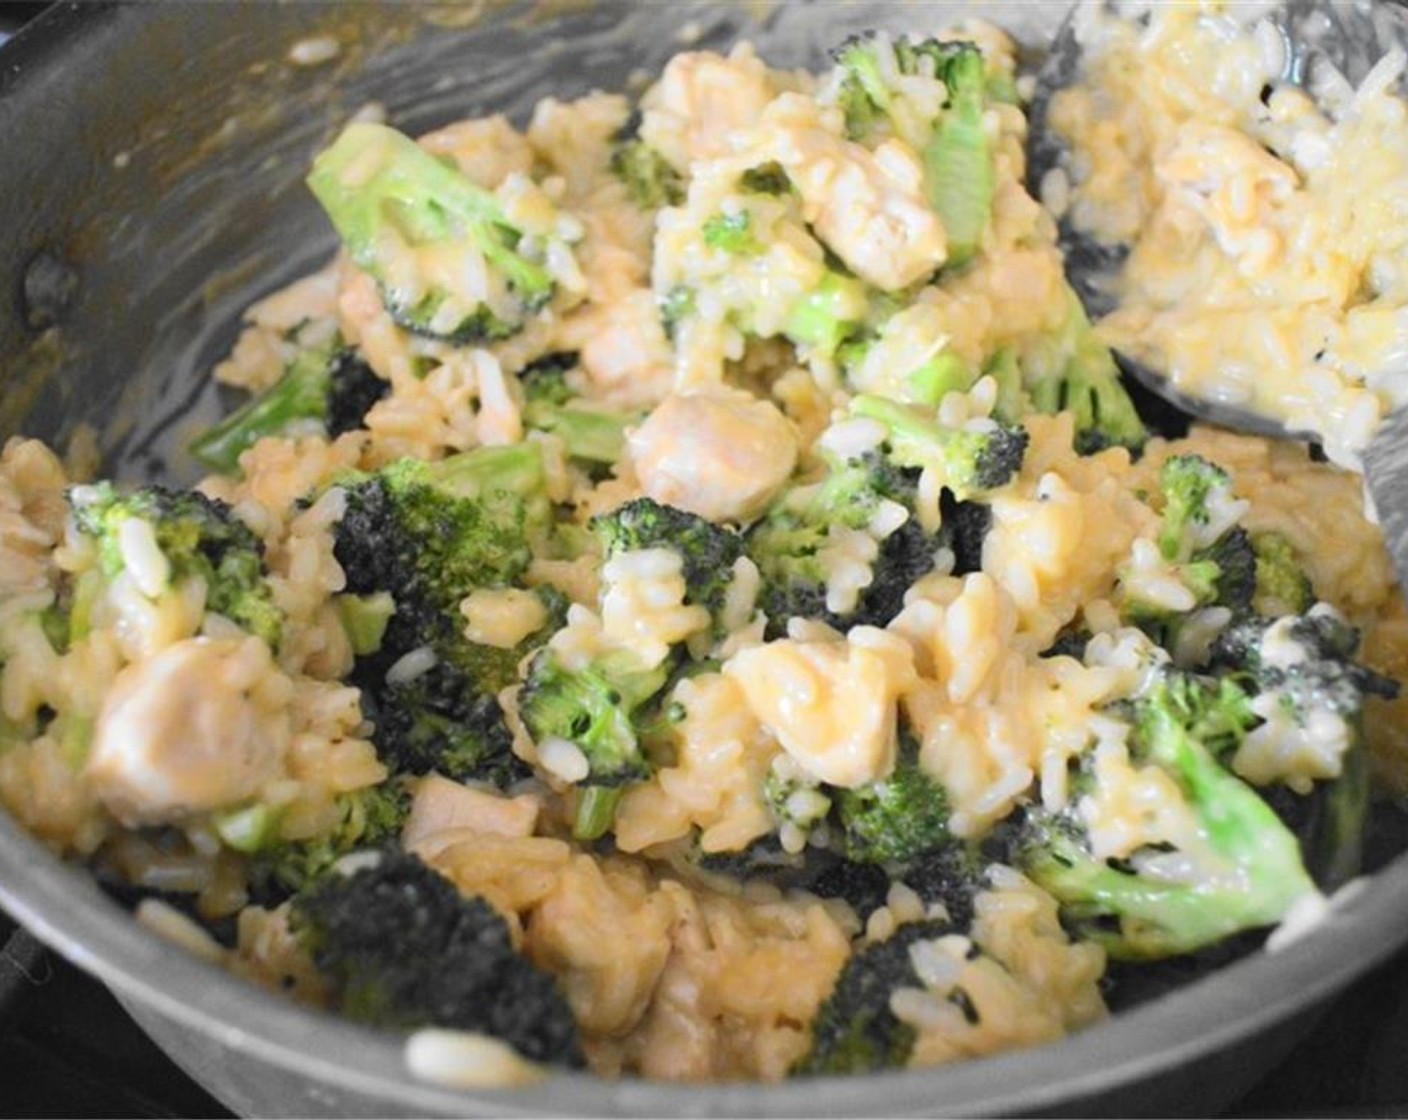 step 9 Once it is done, turn off the heat and stir in the Shredded Extra Sharp Cheddar Cheese (1 cup), chicken, and broccoli. Let it all meld together and warm through.